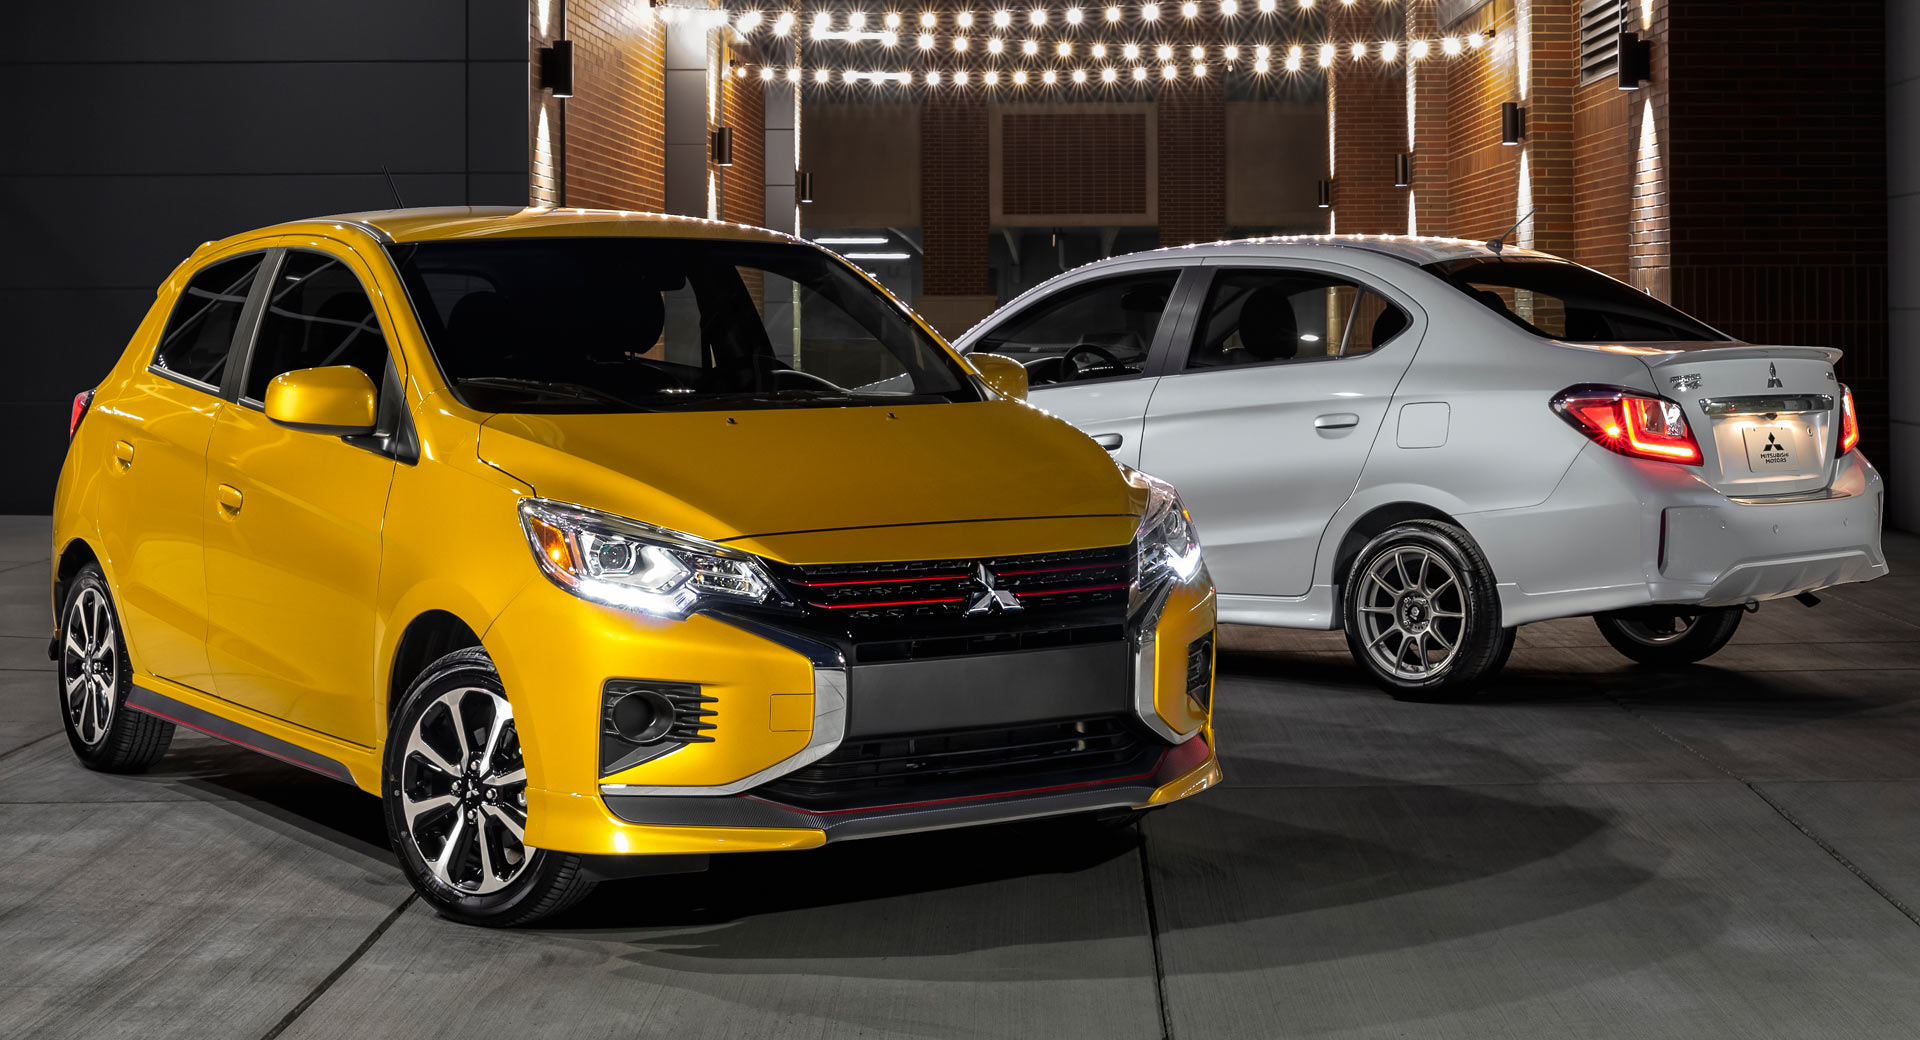 Facelifted Mitsubishi Mirage Arrives In America With A Host Of